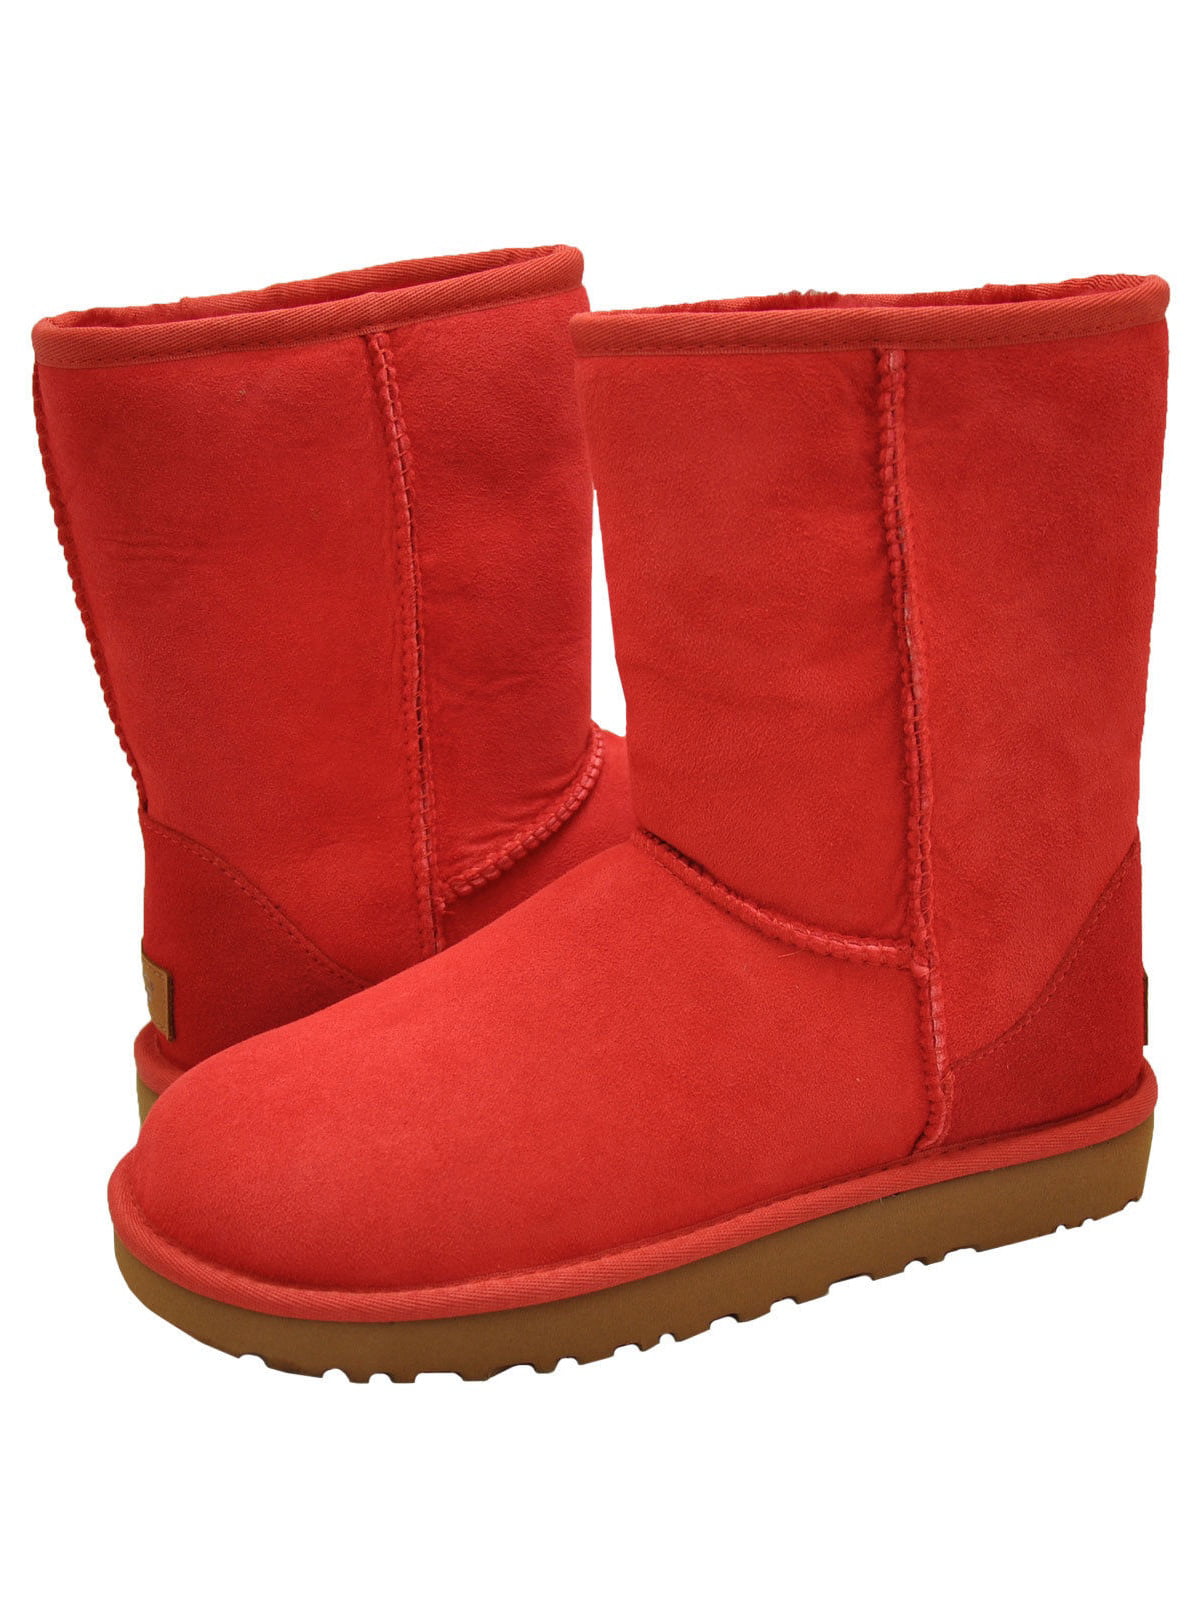 red classic uggs